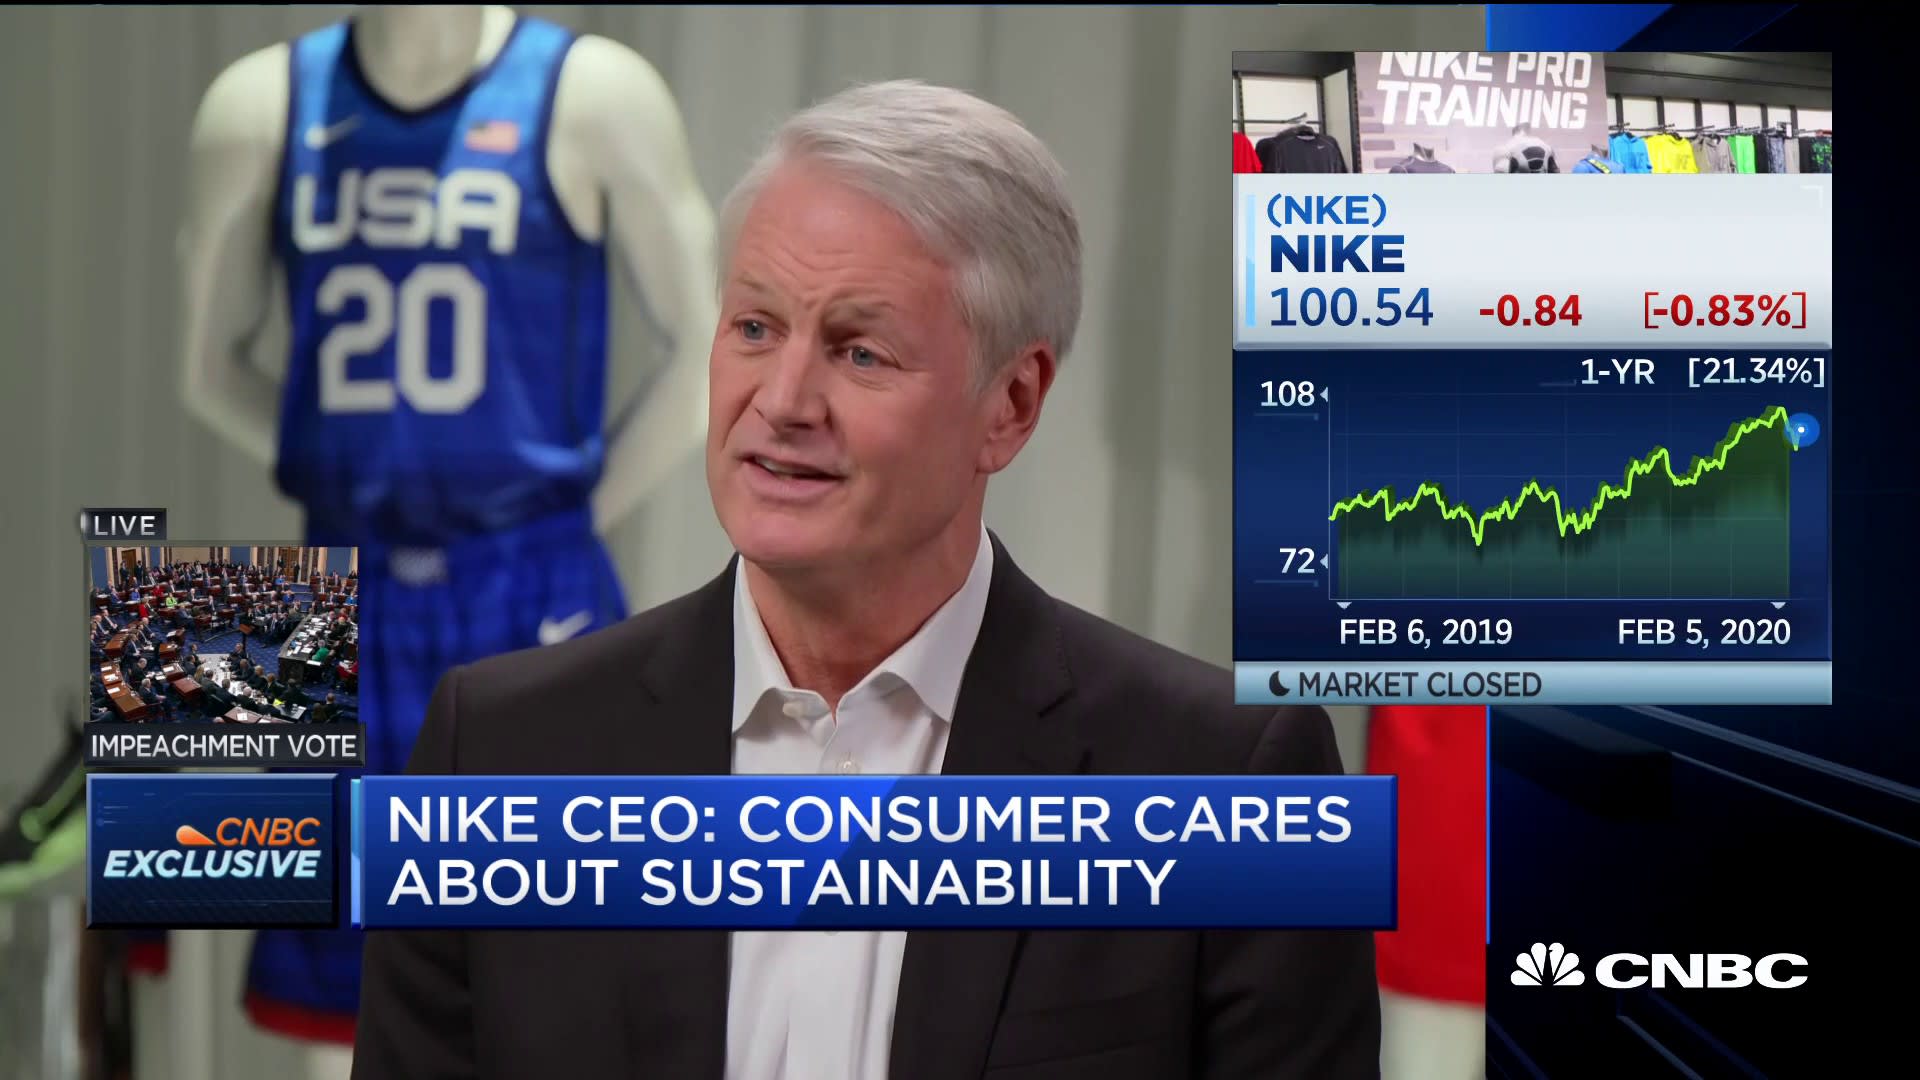 full interview with Nike CEO John Donahoe